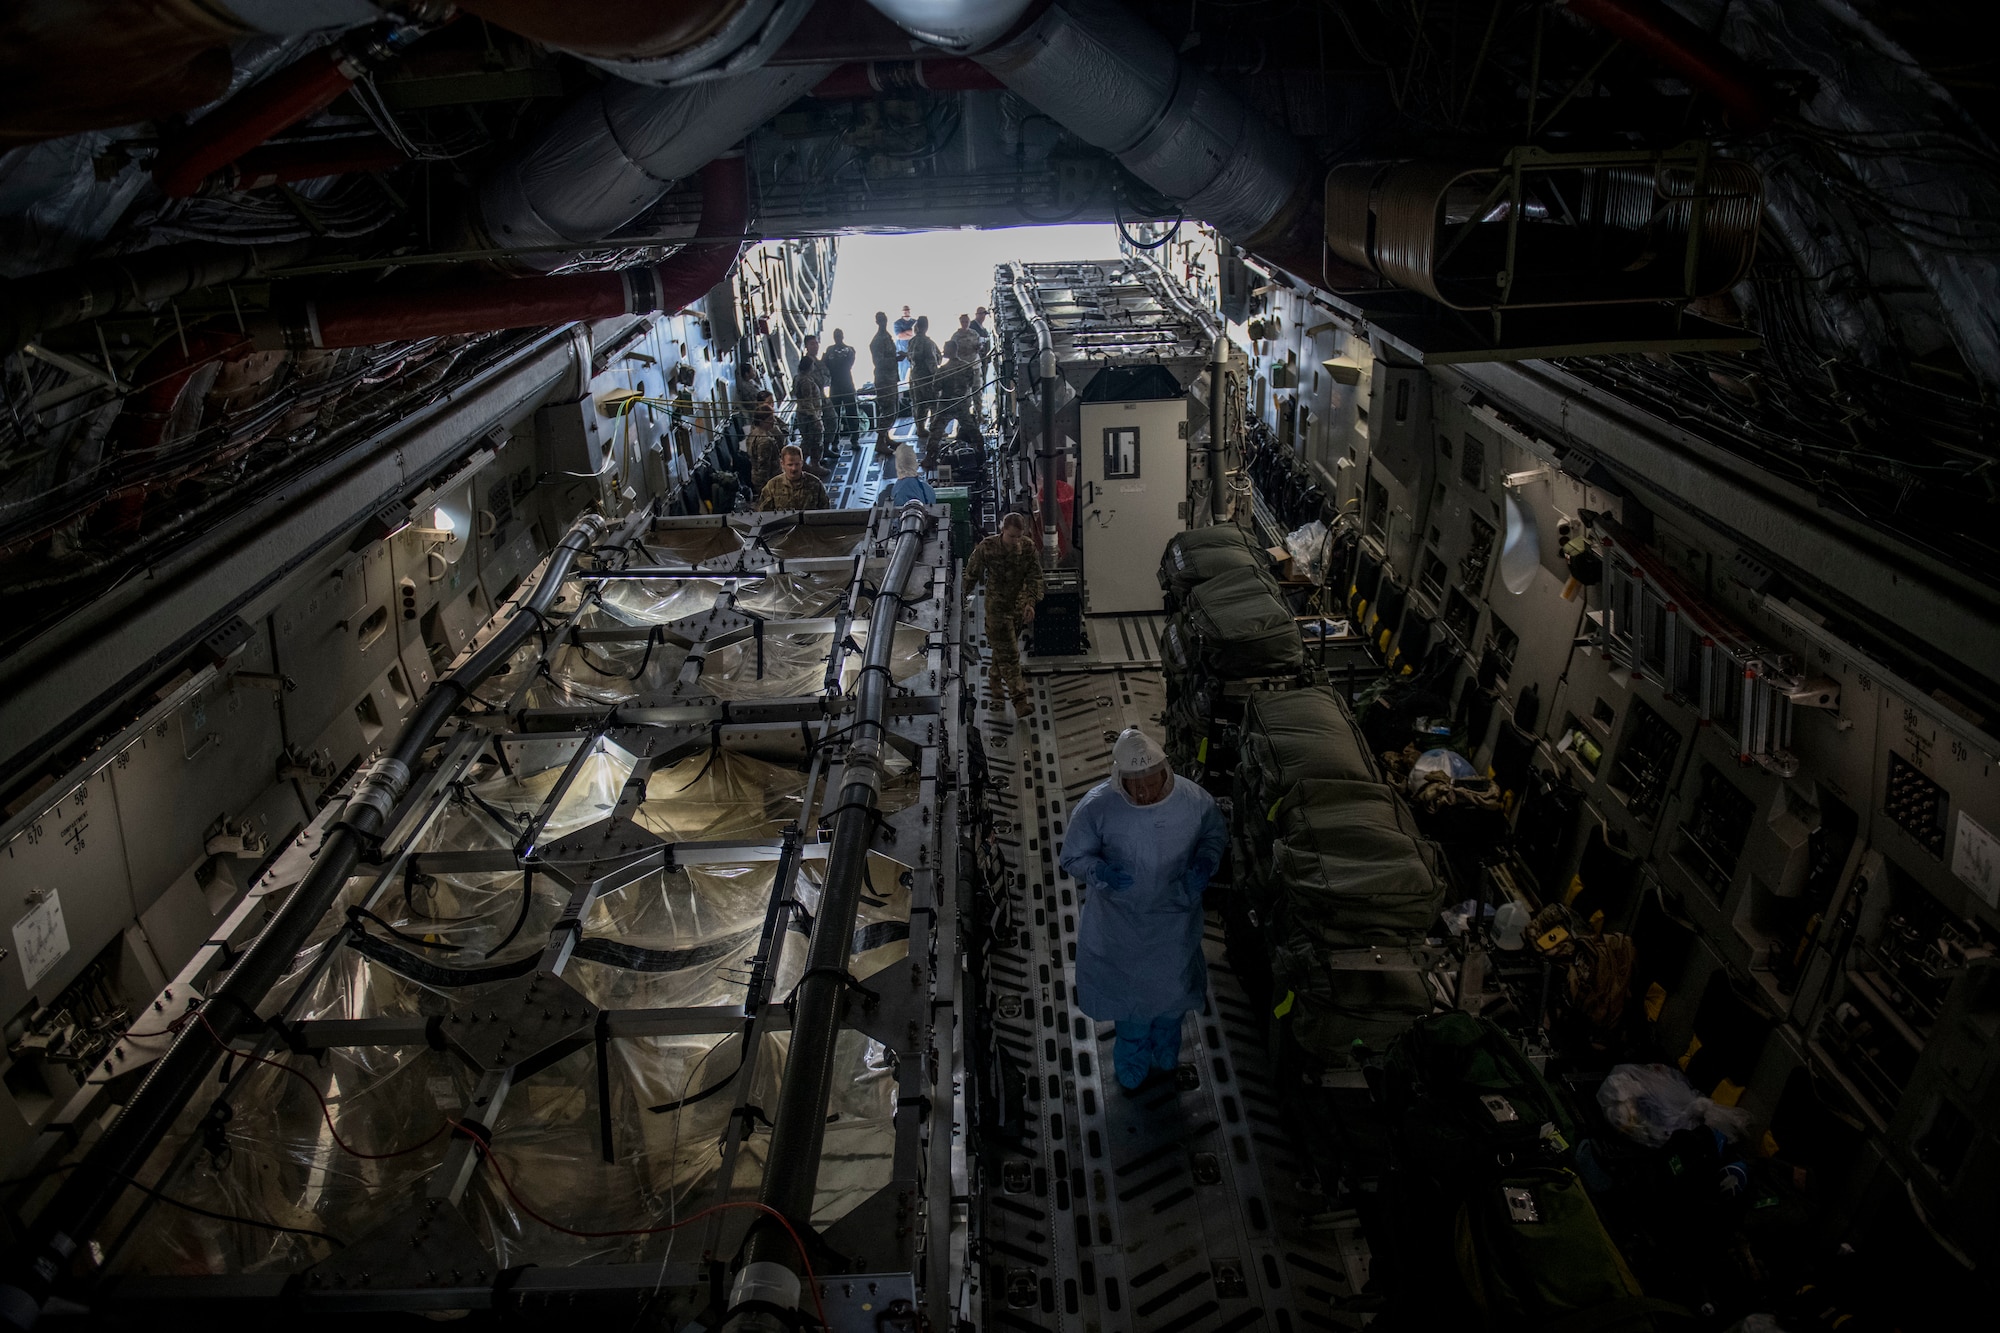 Flight nurses and critical care air transport team members assigned to the 43rd Aeromedical Evacuation Squadron from Pope Army Air Field, N.C., and 375th AES from Scott Air Force Base, Ill., prepare a Transport Isolation System for simulated Ebola patients during a TIS training exercise at Joint Base Charleston, S.C., October 23, 2019. The TIS is a device used to transport Ebola patients, either by C-17 Globemaster III or C-130 Hercules, while preventing the spread of disease to medical personnel and aircrews until the patient can get to one of three designated hospitals in the United States that can treat Ebola patients. JB Charleston is currently the only military installation with a TIS. The TIS mission is a sub-specialty of the aeromedical evacuation mission which requires frequent training to maintain readiness.